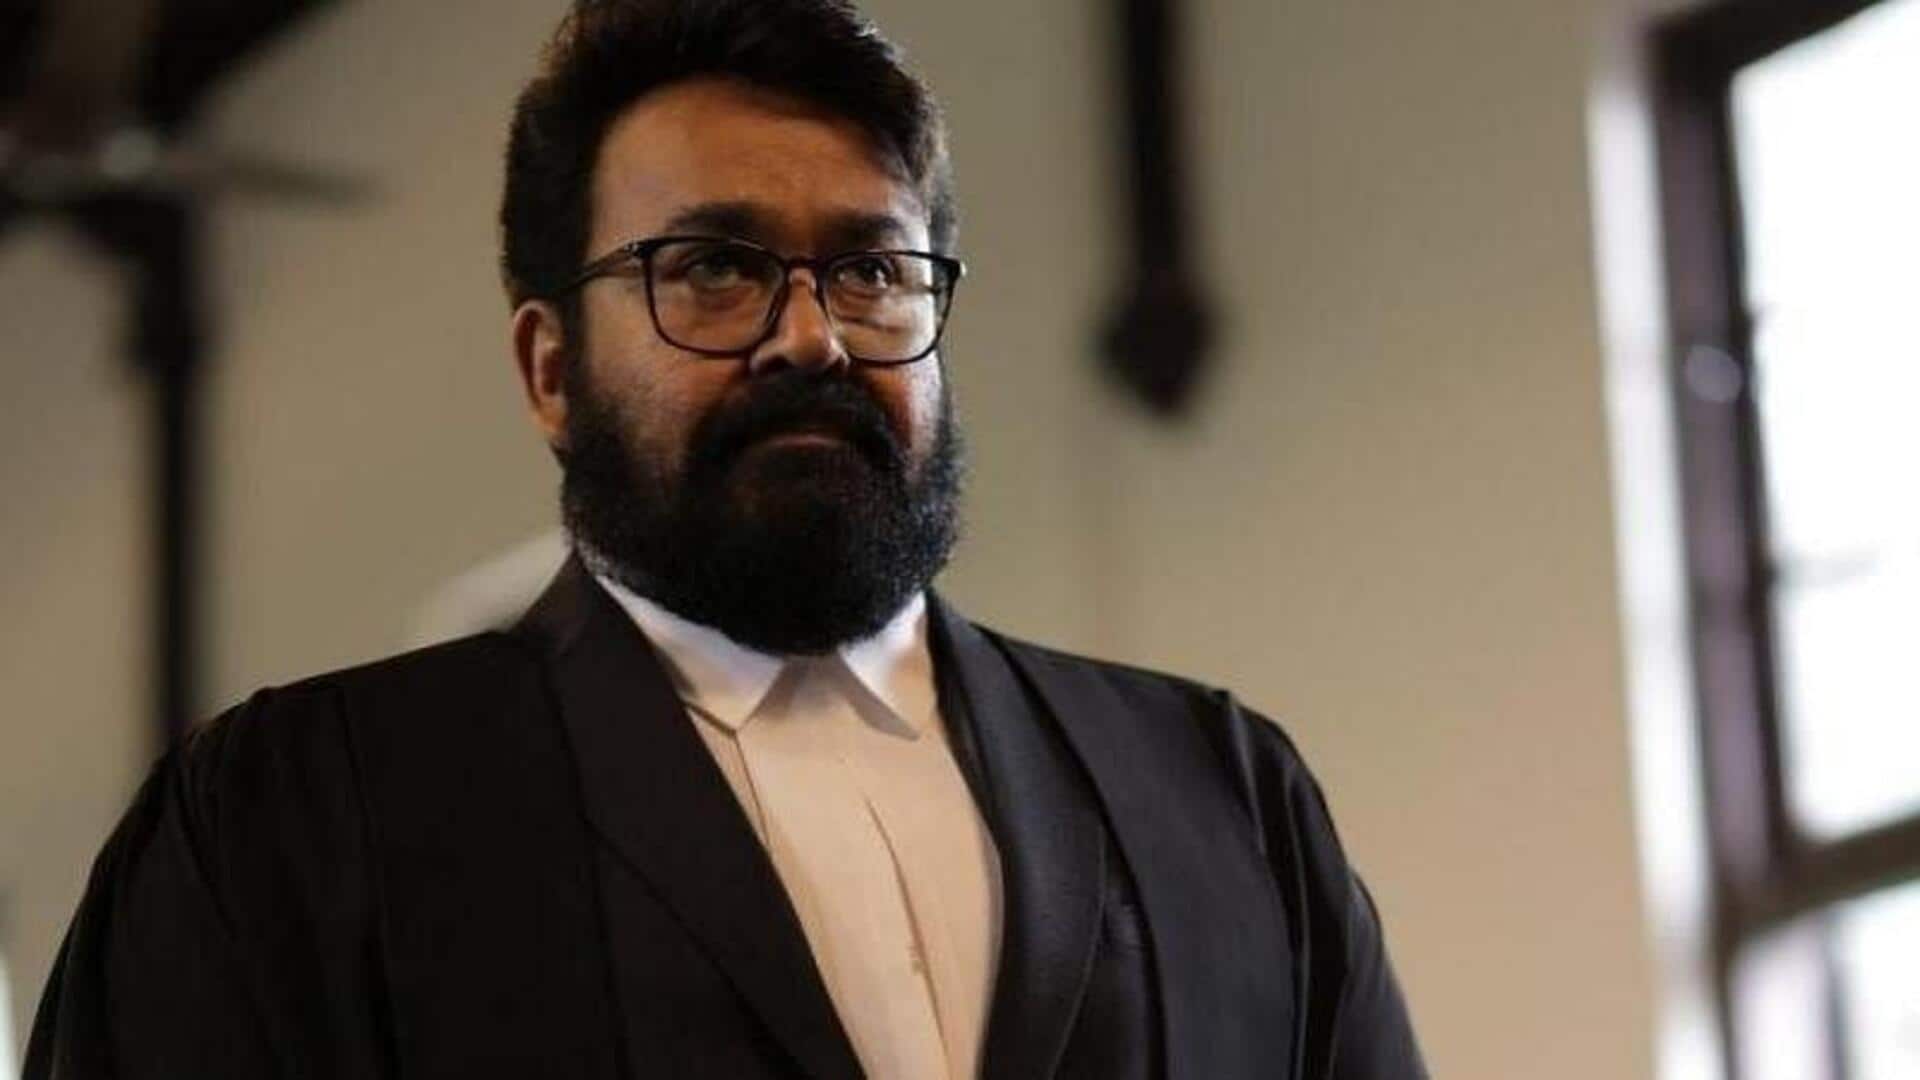 Box office collection: Mohanlal's courtroom drama 'Neru' remains steady